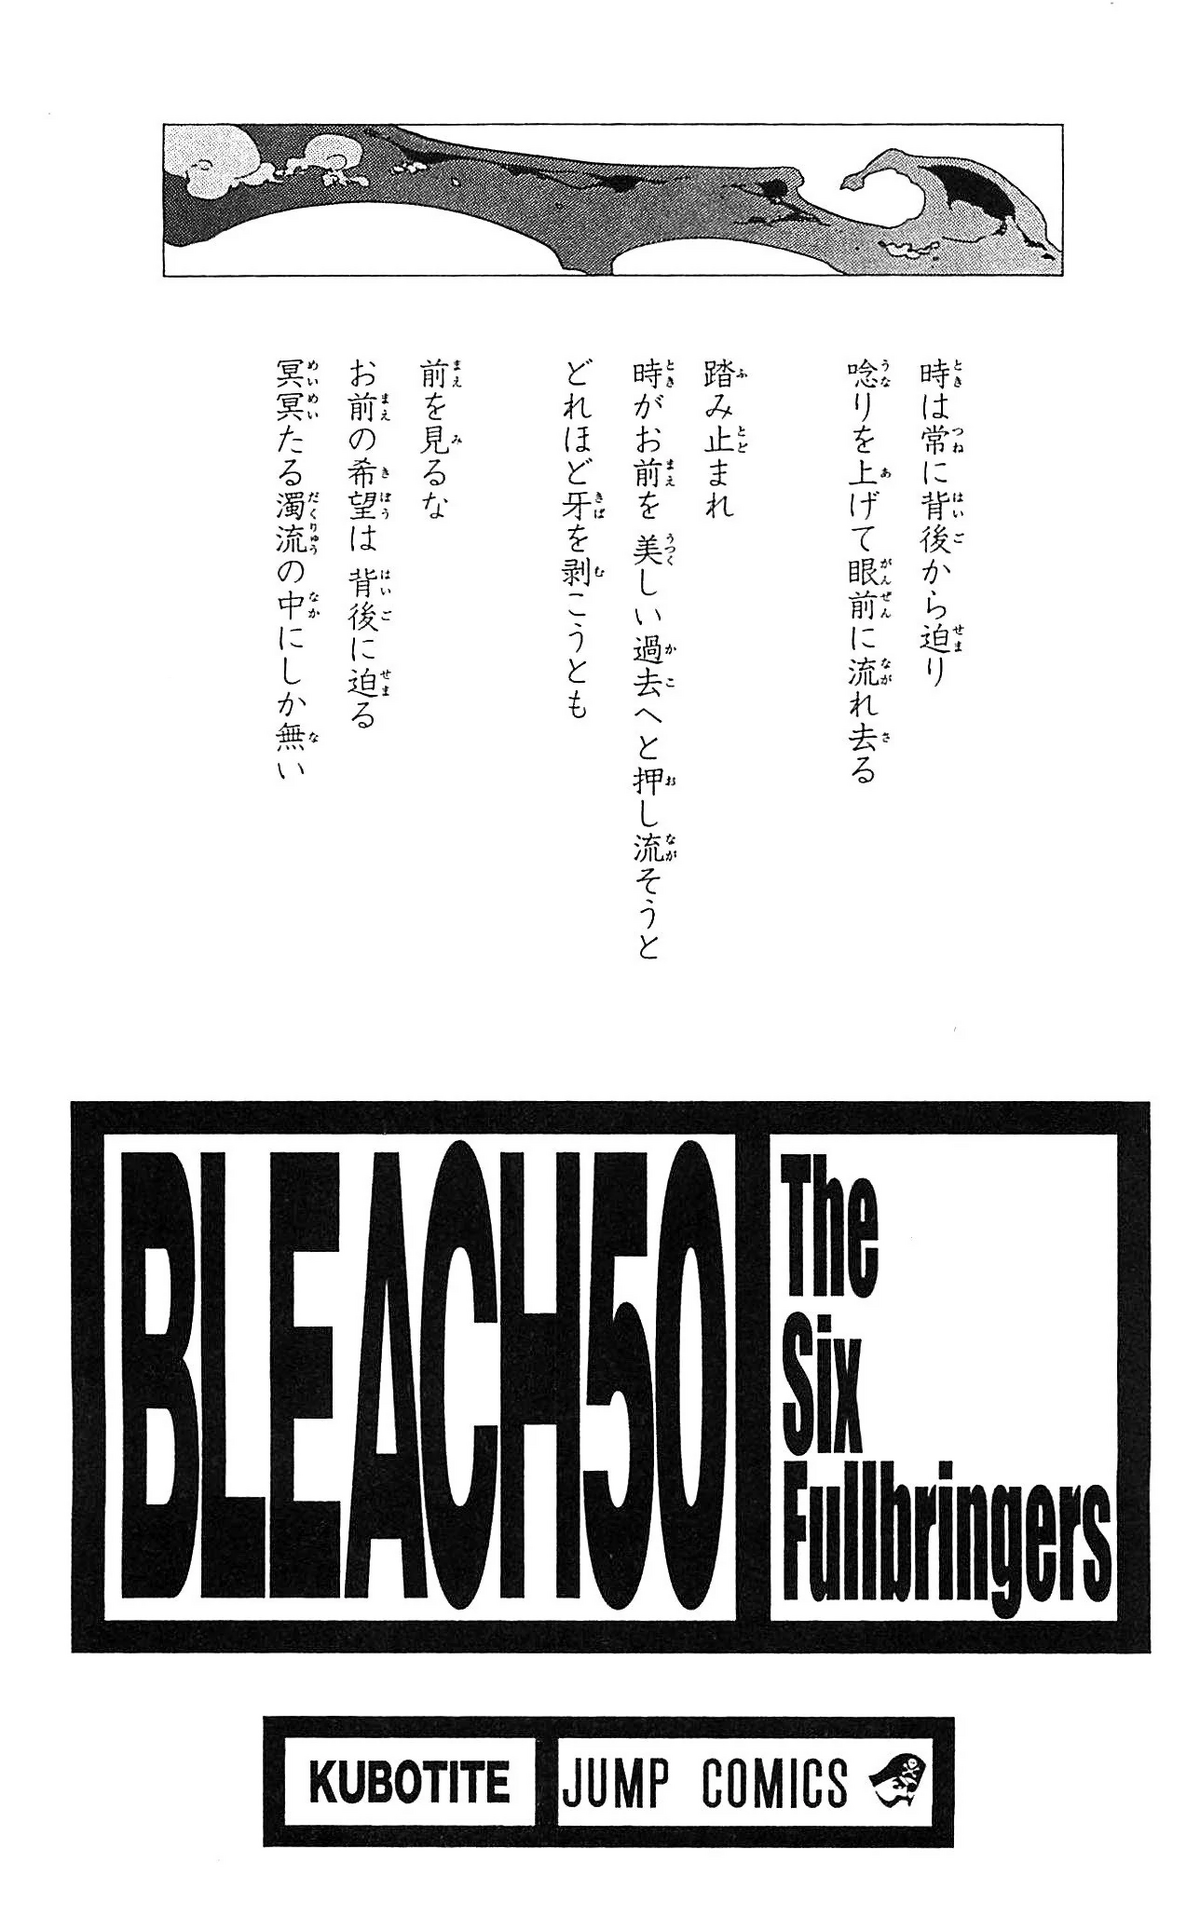 Meaning and significance of each phrase in the Auswahlen chant. Kubo hid  tons of important details in that obscure string of words. : r/bleach